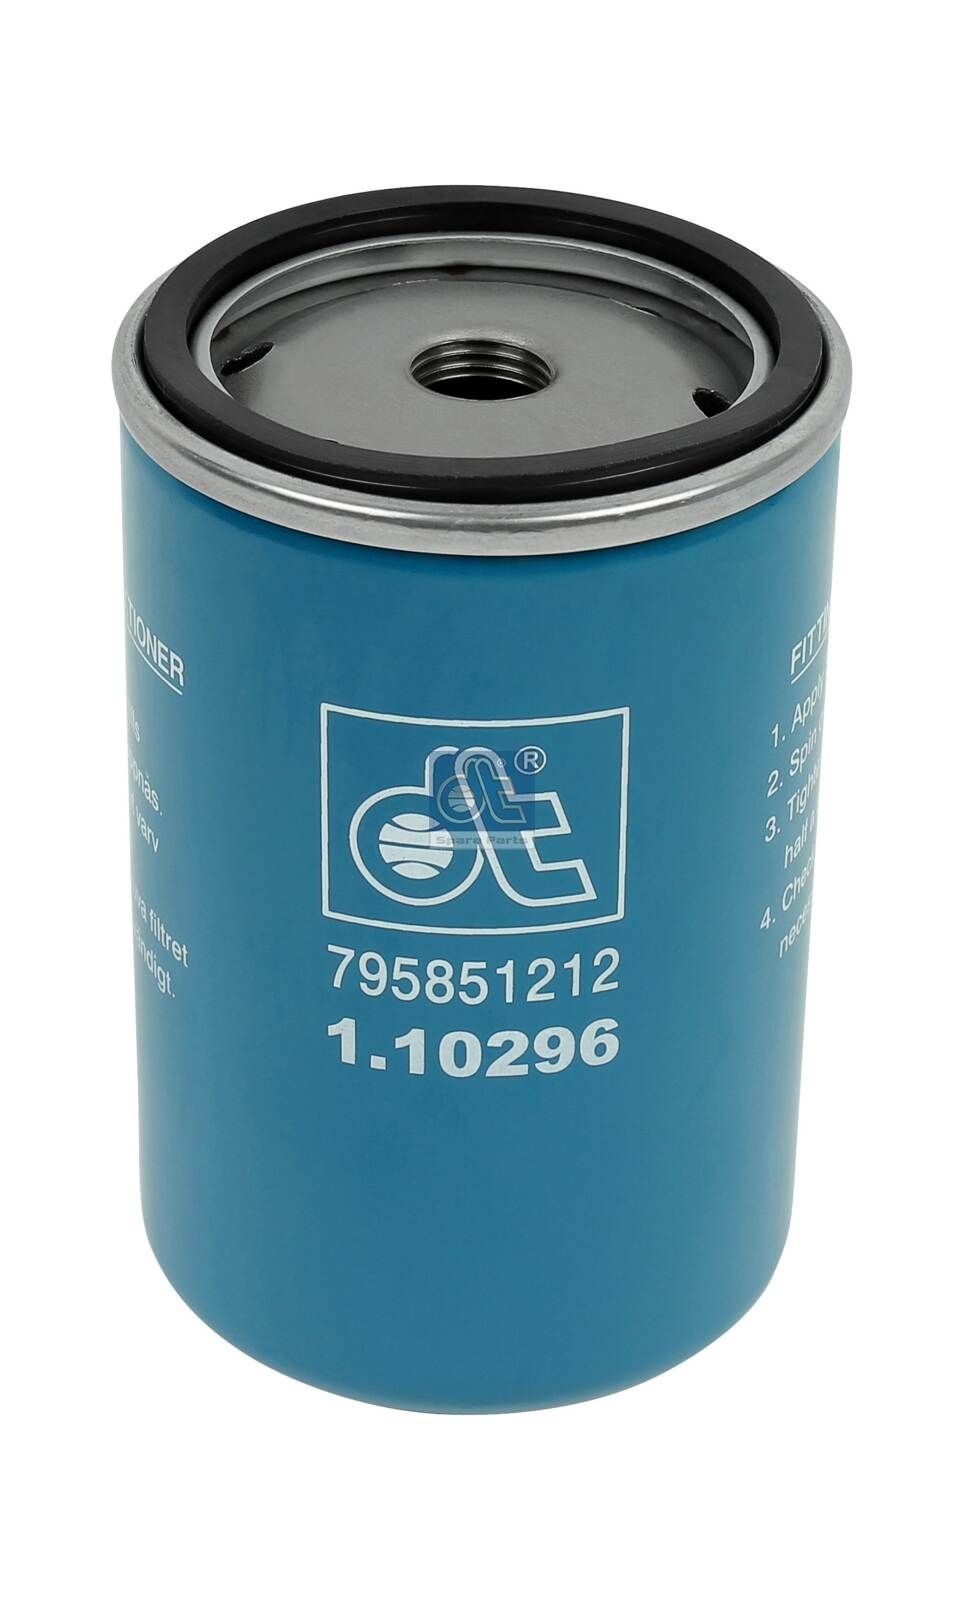 WK 723/1 DT Spare Parts 1.10296 Fuel filter 8125339